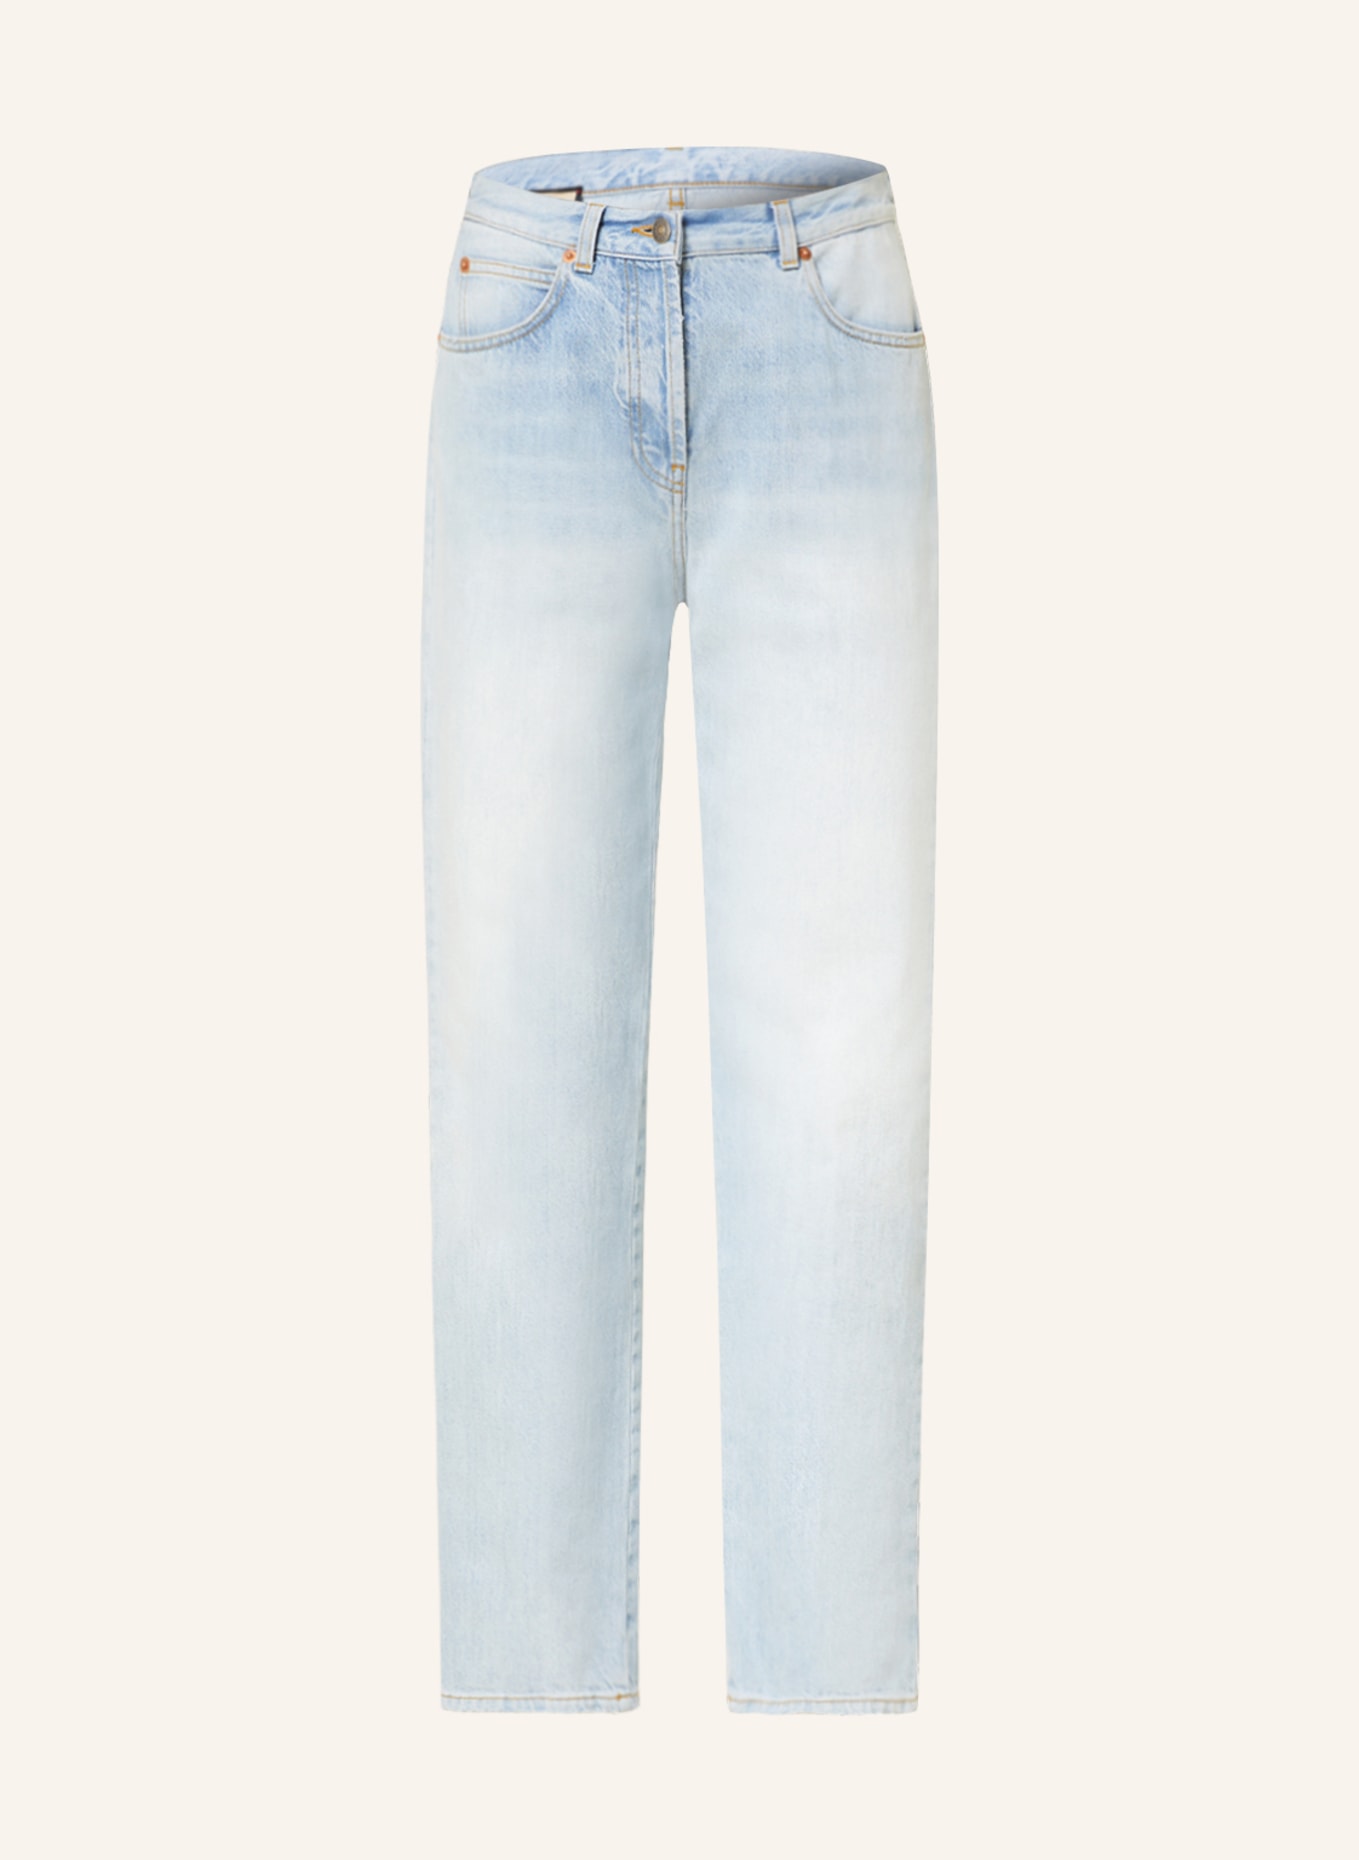 GUCCI Straight jeans, Color: 4452 LIGHT BLUE/ (Image 1)